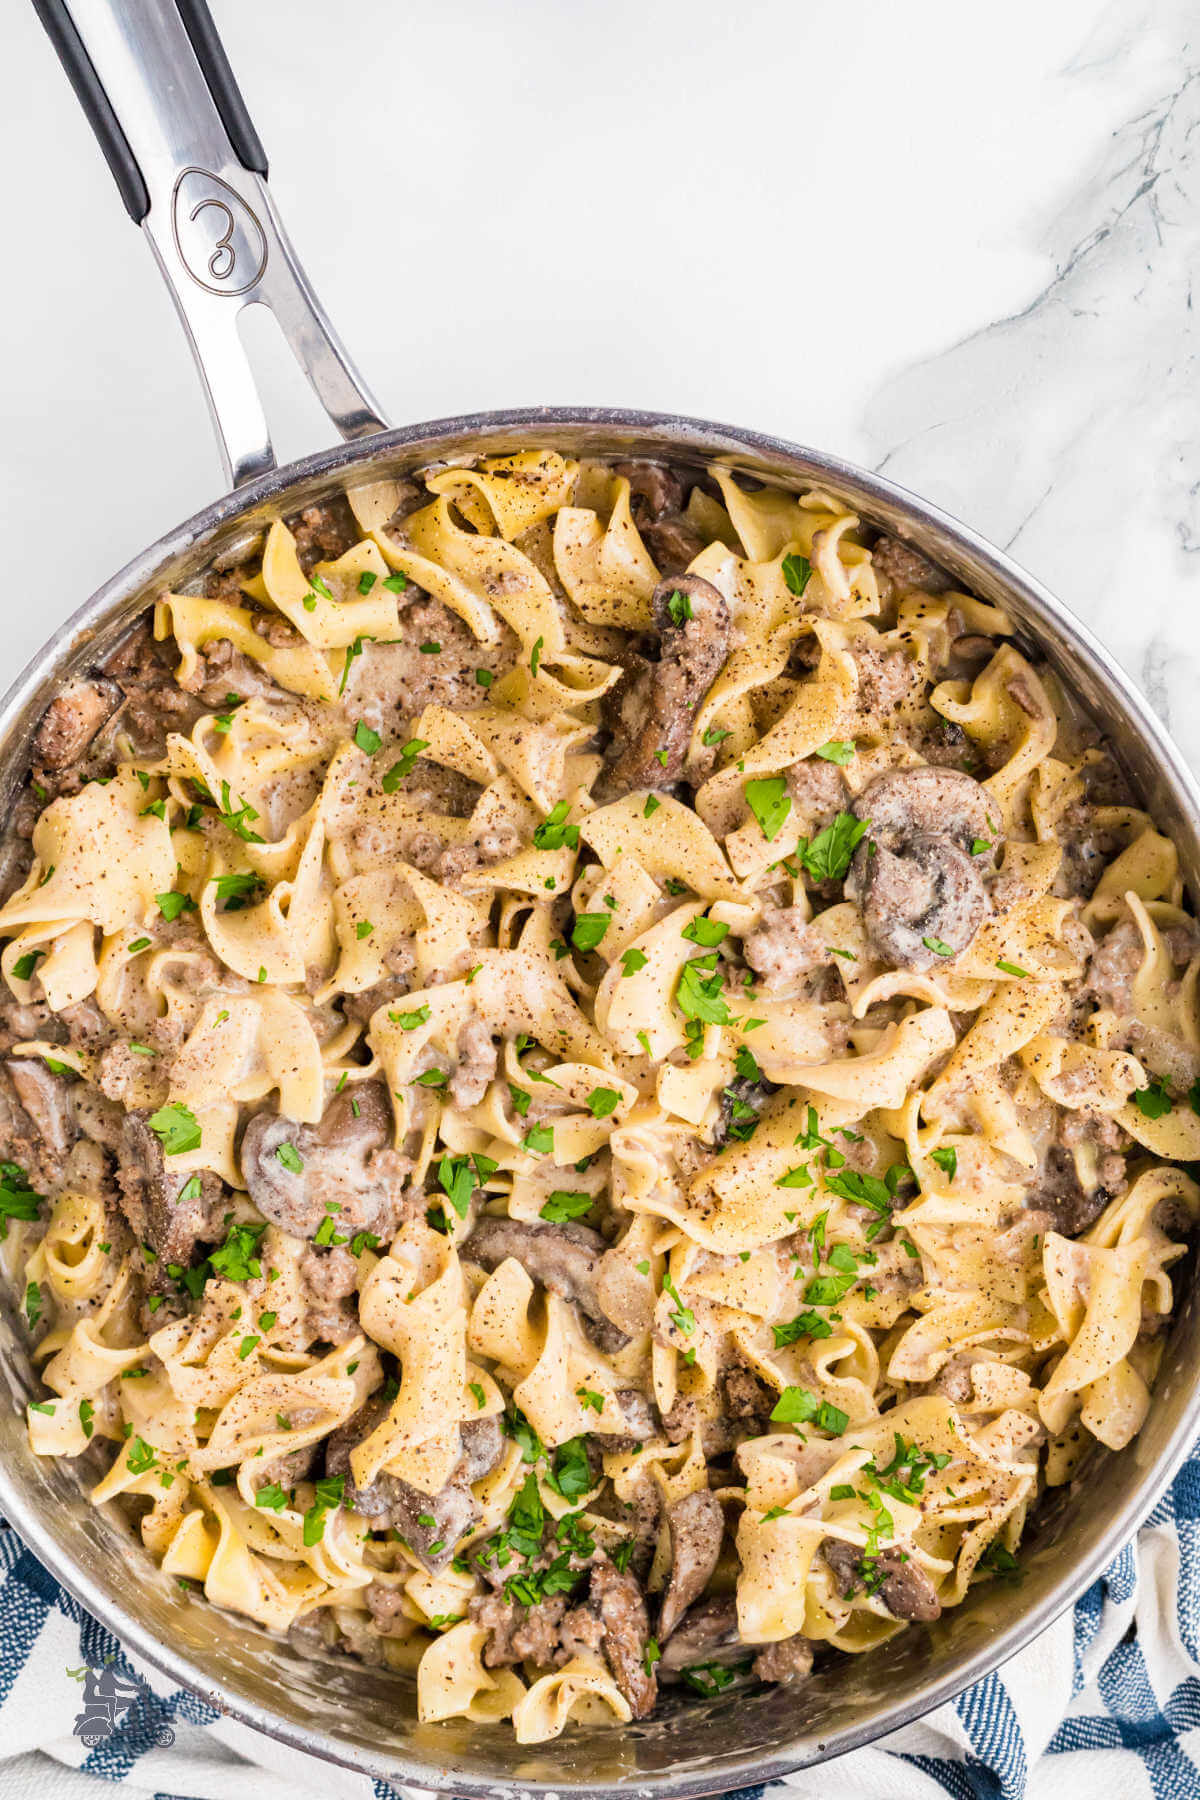 Final step to making the easy beef stroganoff recipe.